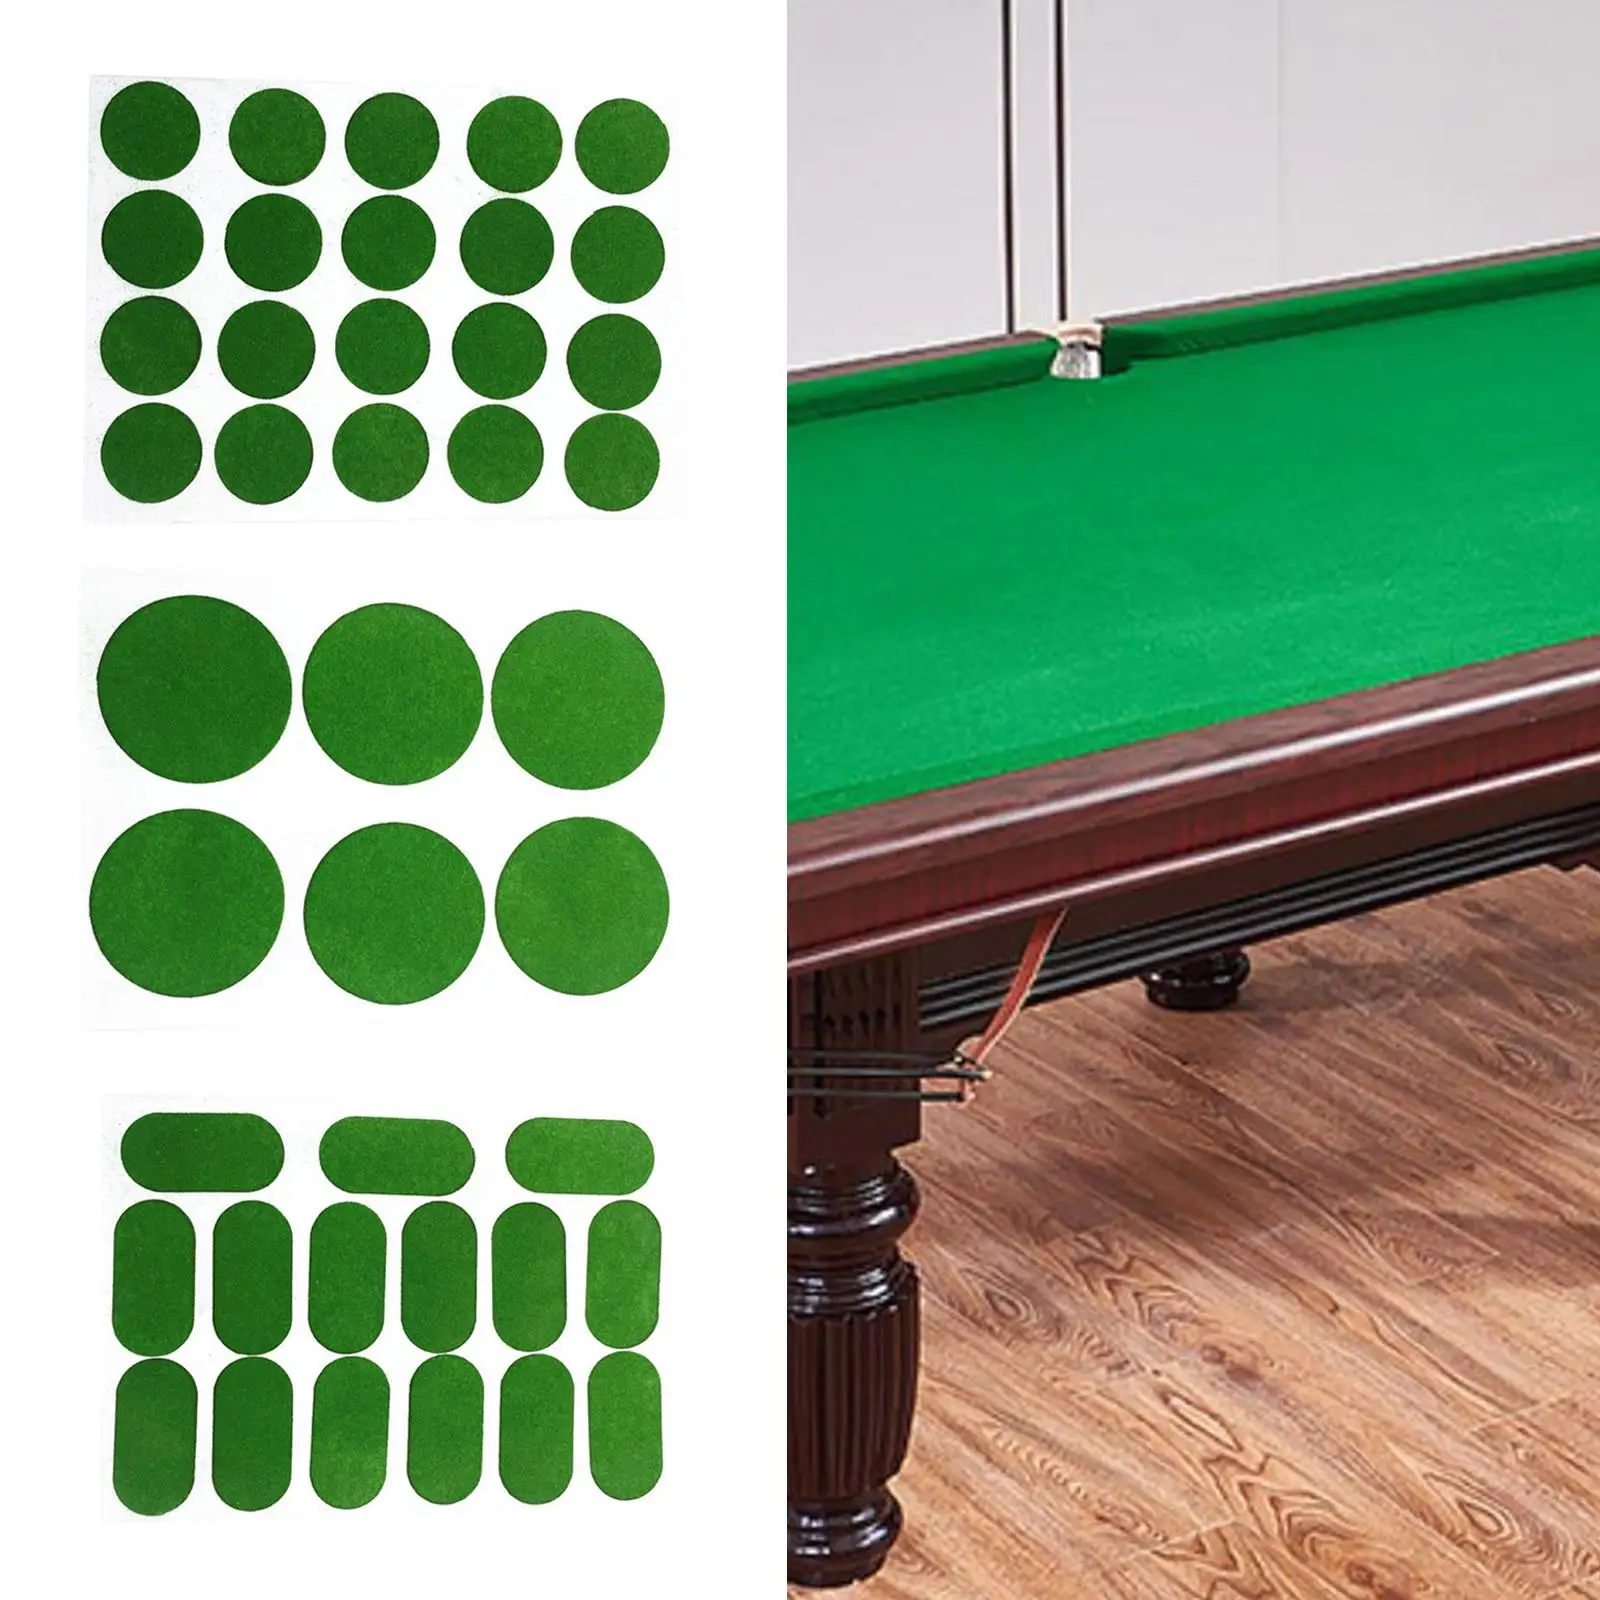 Billiard Pool Table Cloth Plasters Protecting Stickers Protector Green Spots